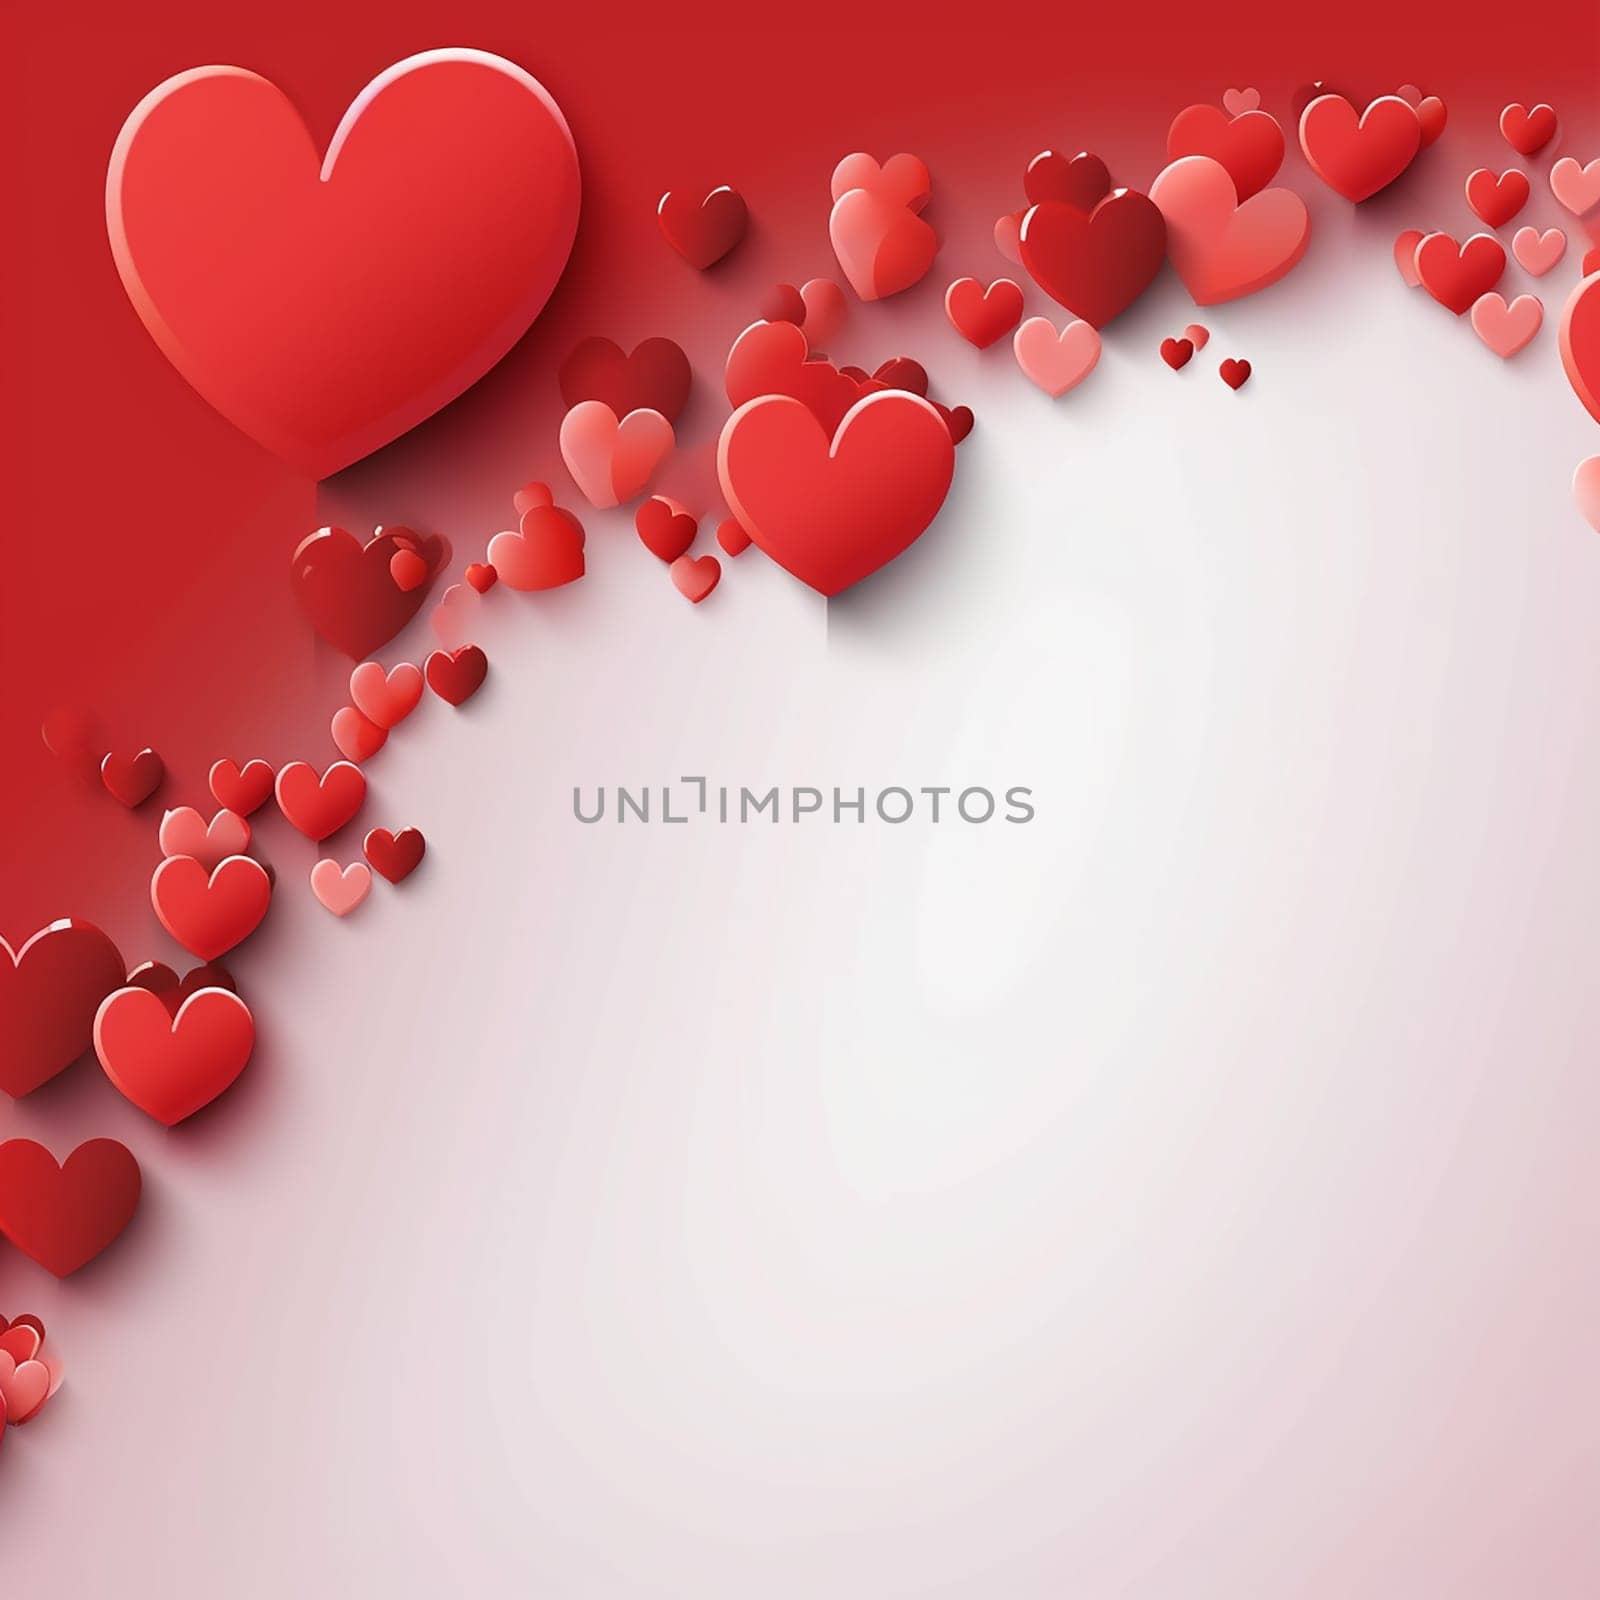 Various hearts on a gradient red background, symbolizing love and Valentine's Day.